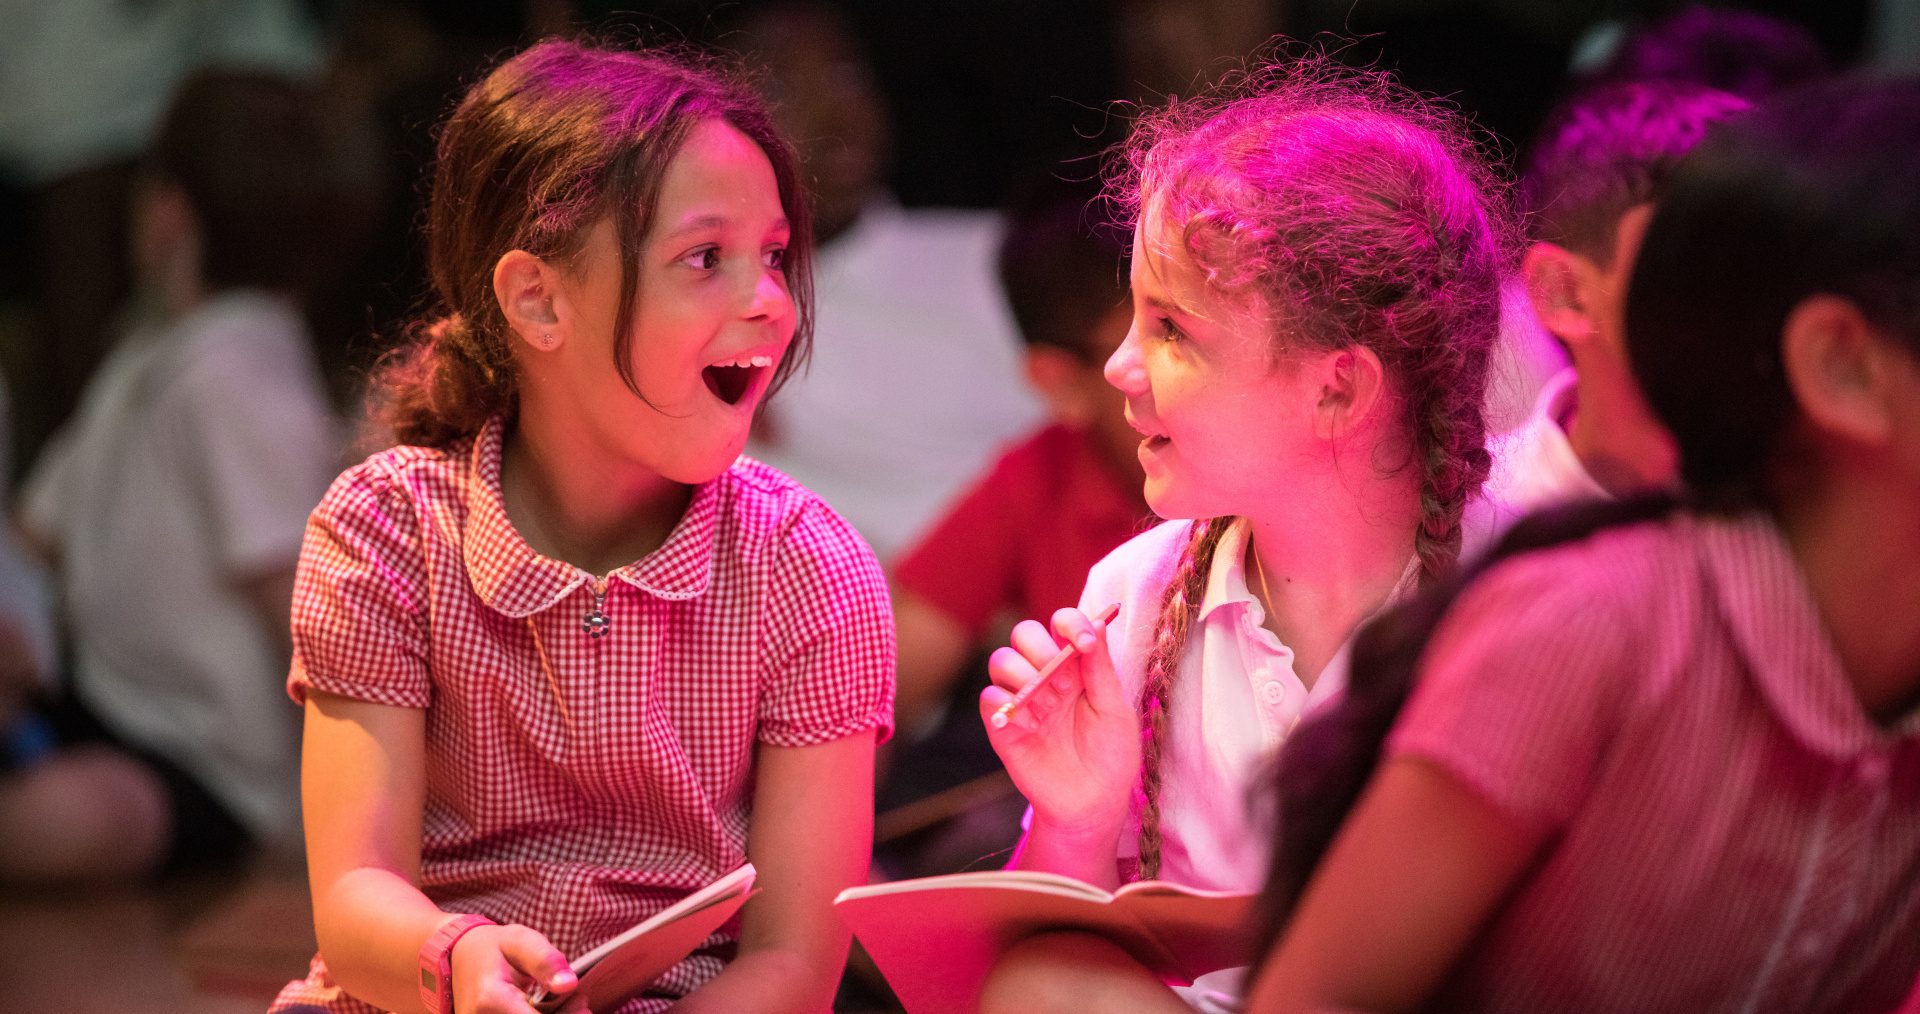 Two pupils look at each other excitedly. Each holds a pencil and notebook.